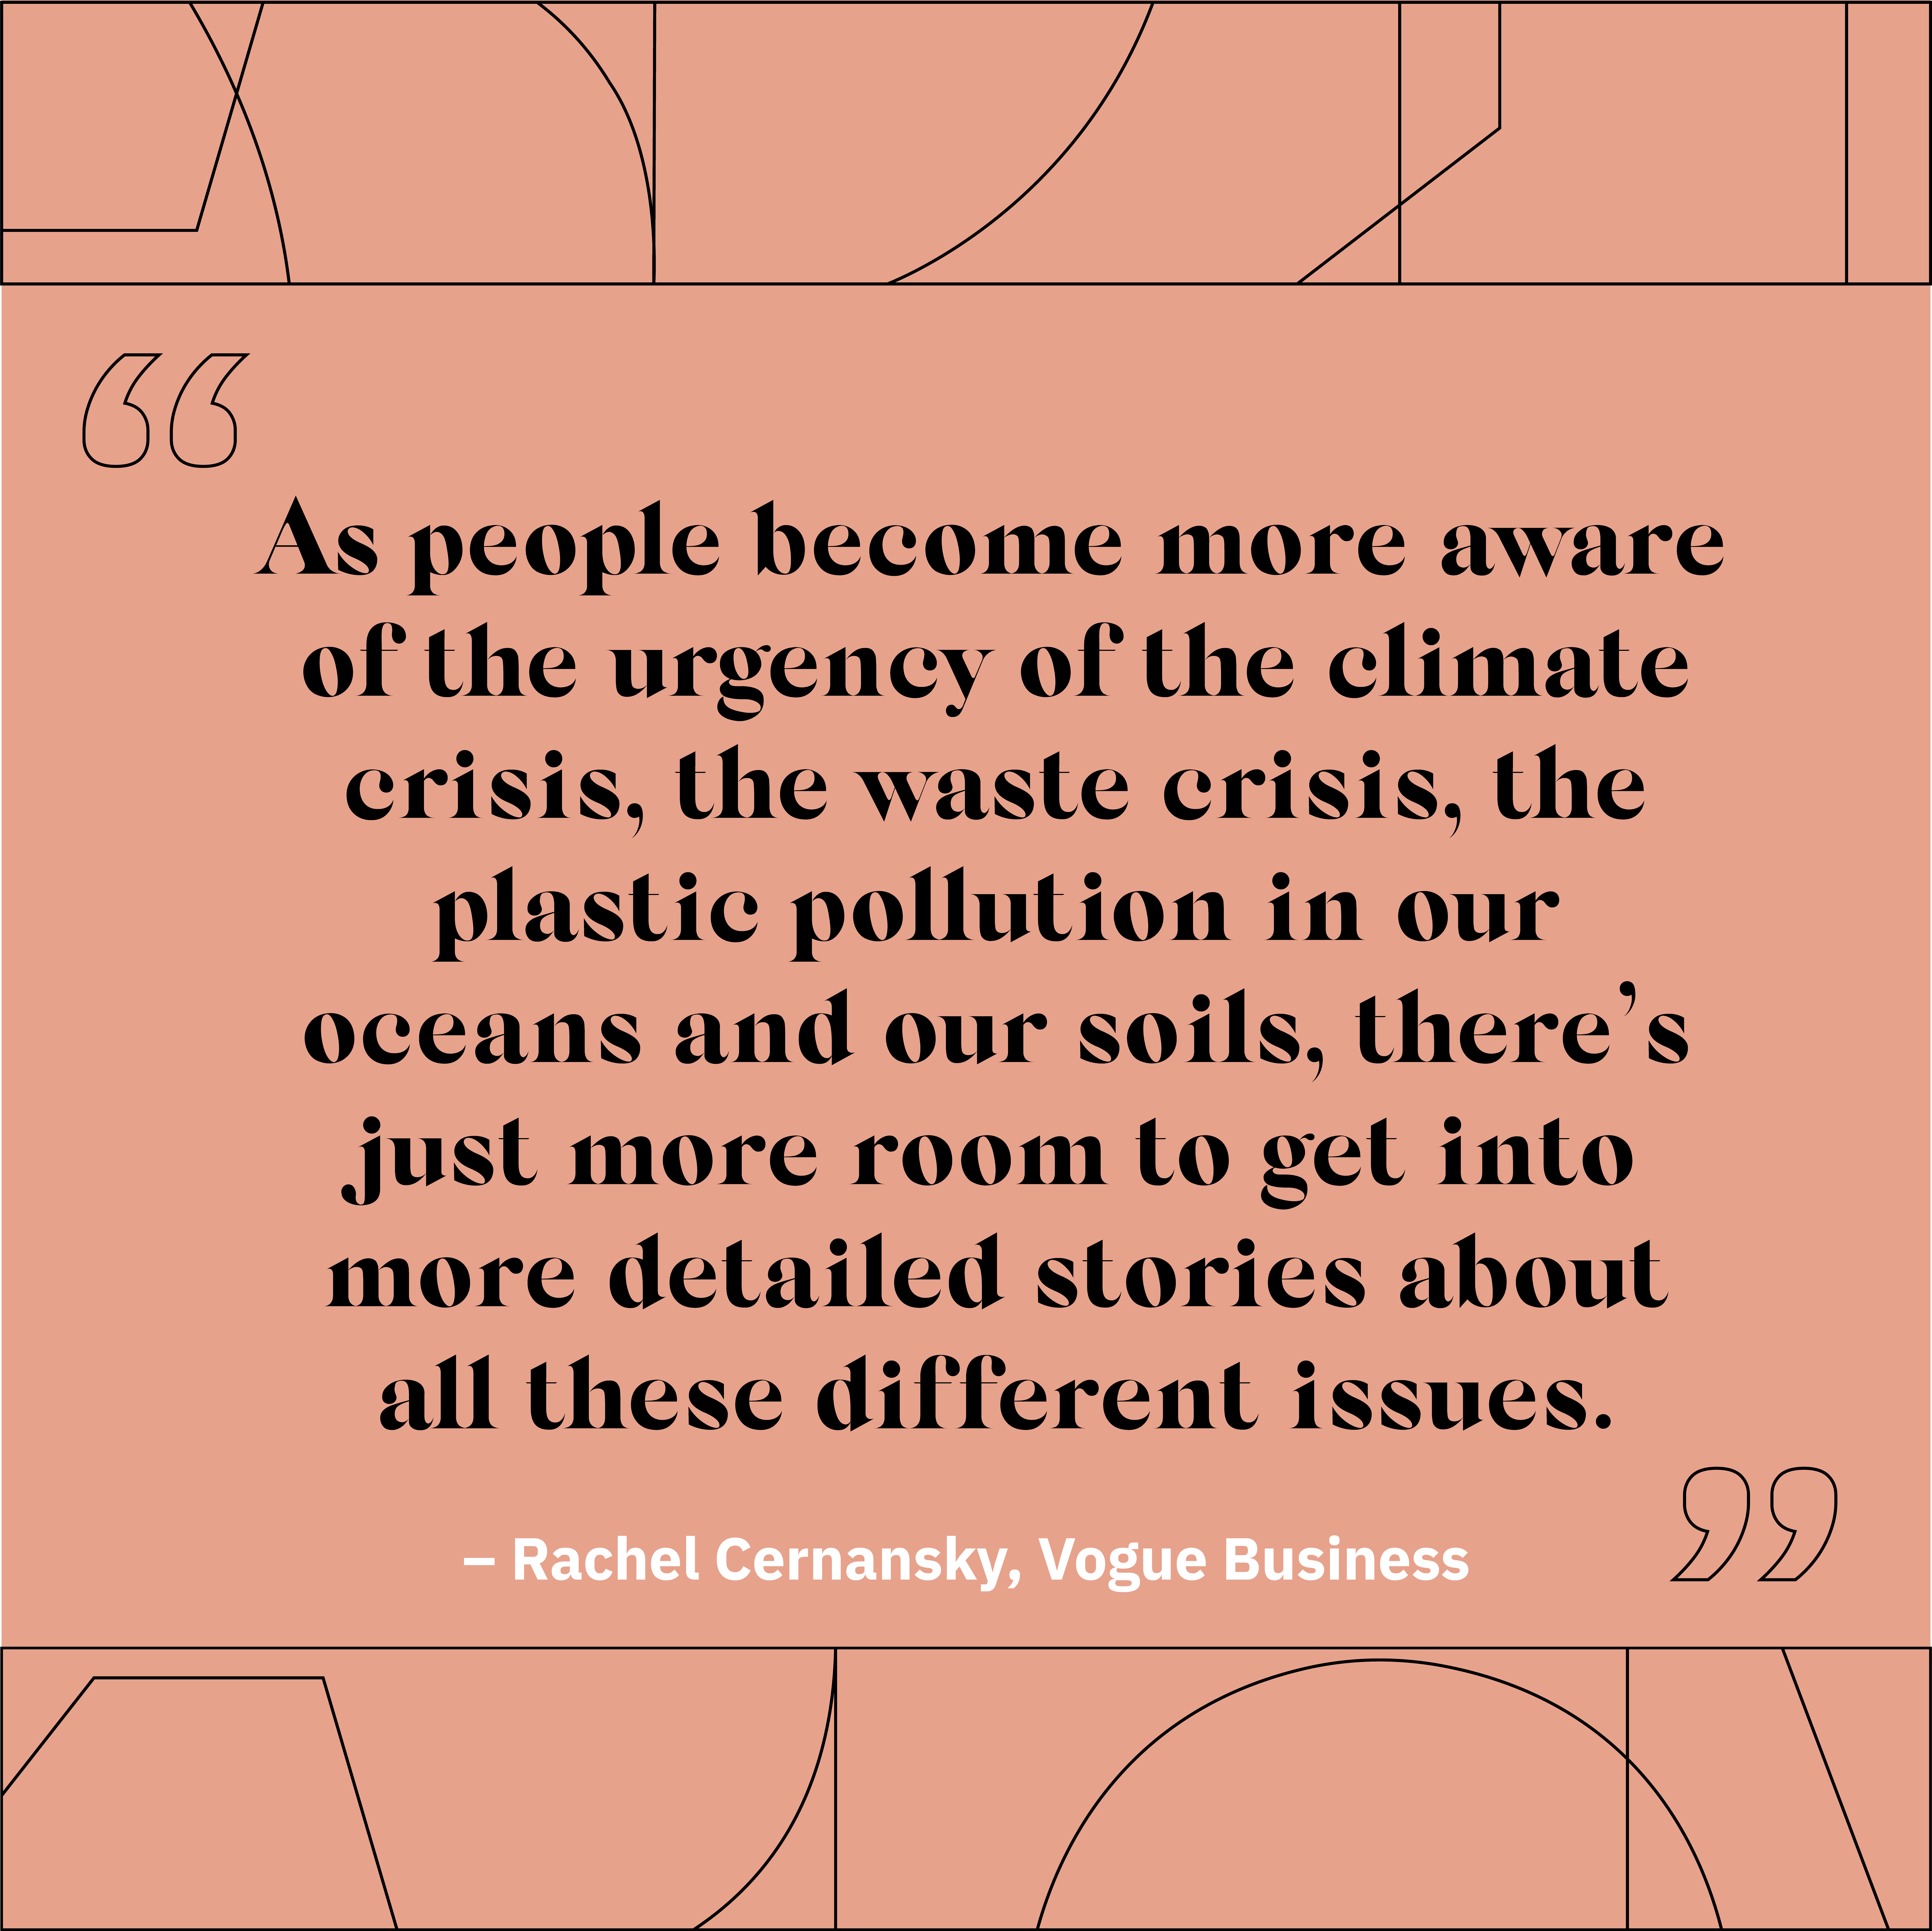 “As people become more aware of the urgency of the climate crisis, the waste crisis, the plastic pollution in our oceans and our soils, there’s just more room to get into more detailed stories about all these different issues.” – Rachel Cernansky, Vogue Business 